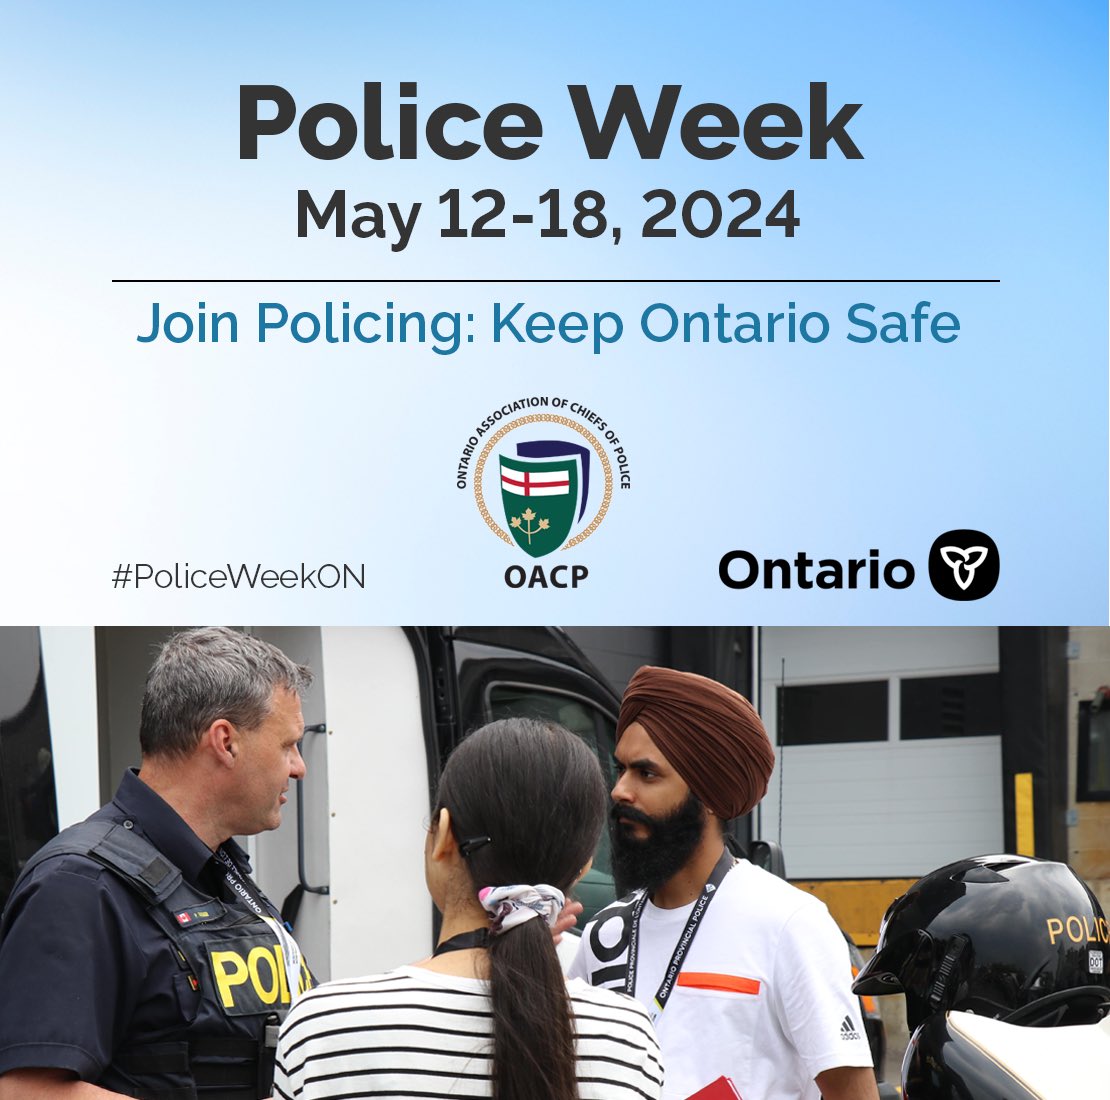 May 12th to 18th marks Police Week in Ontario. If you see a police officer this week, be sure to thank them for their service. To the everyday heroes of @HaltonPolice who keep Oakville safe: thank you!   #PoliceWeekON